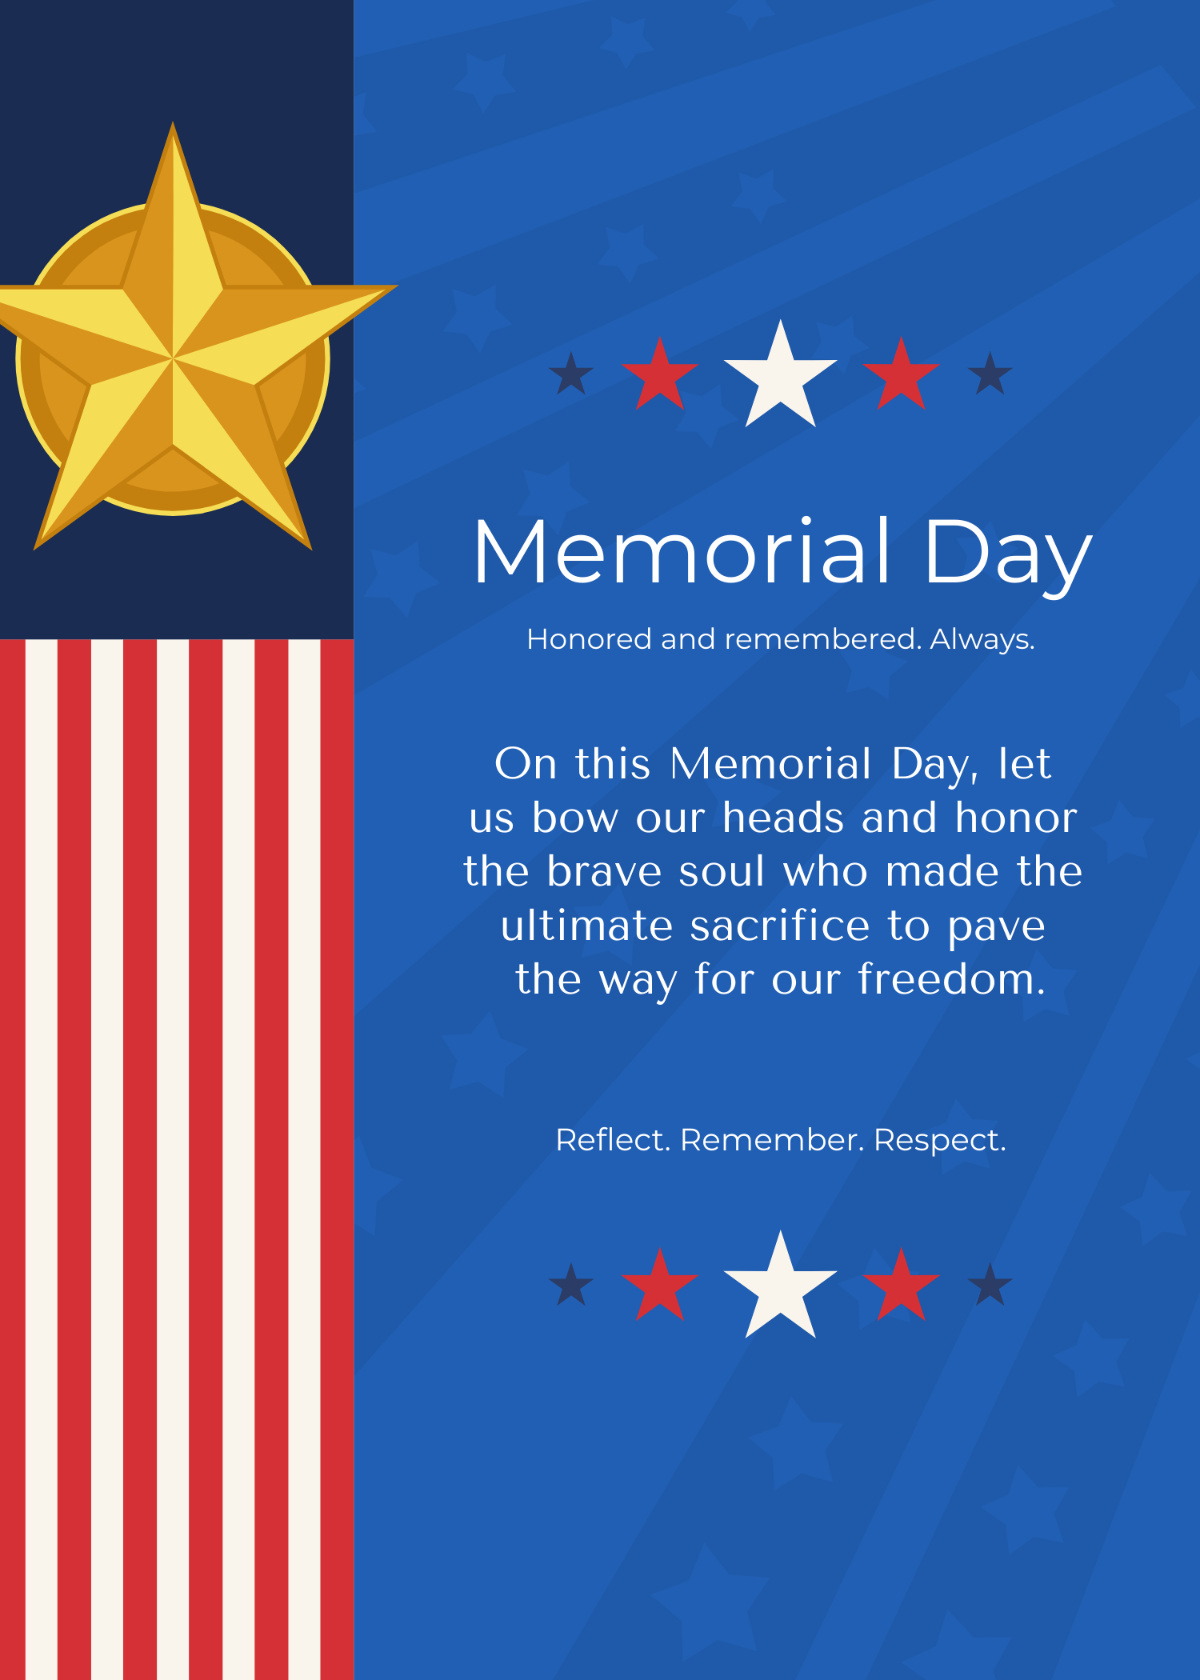 Memorial Day Business Message